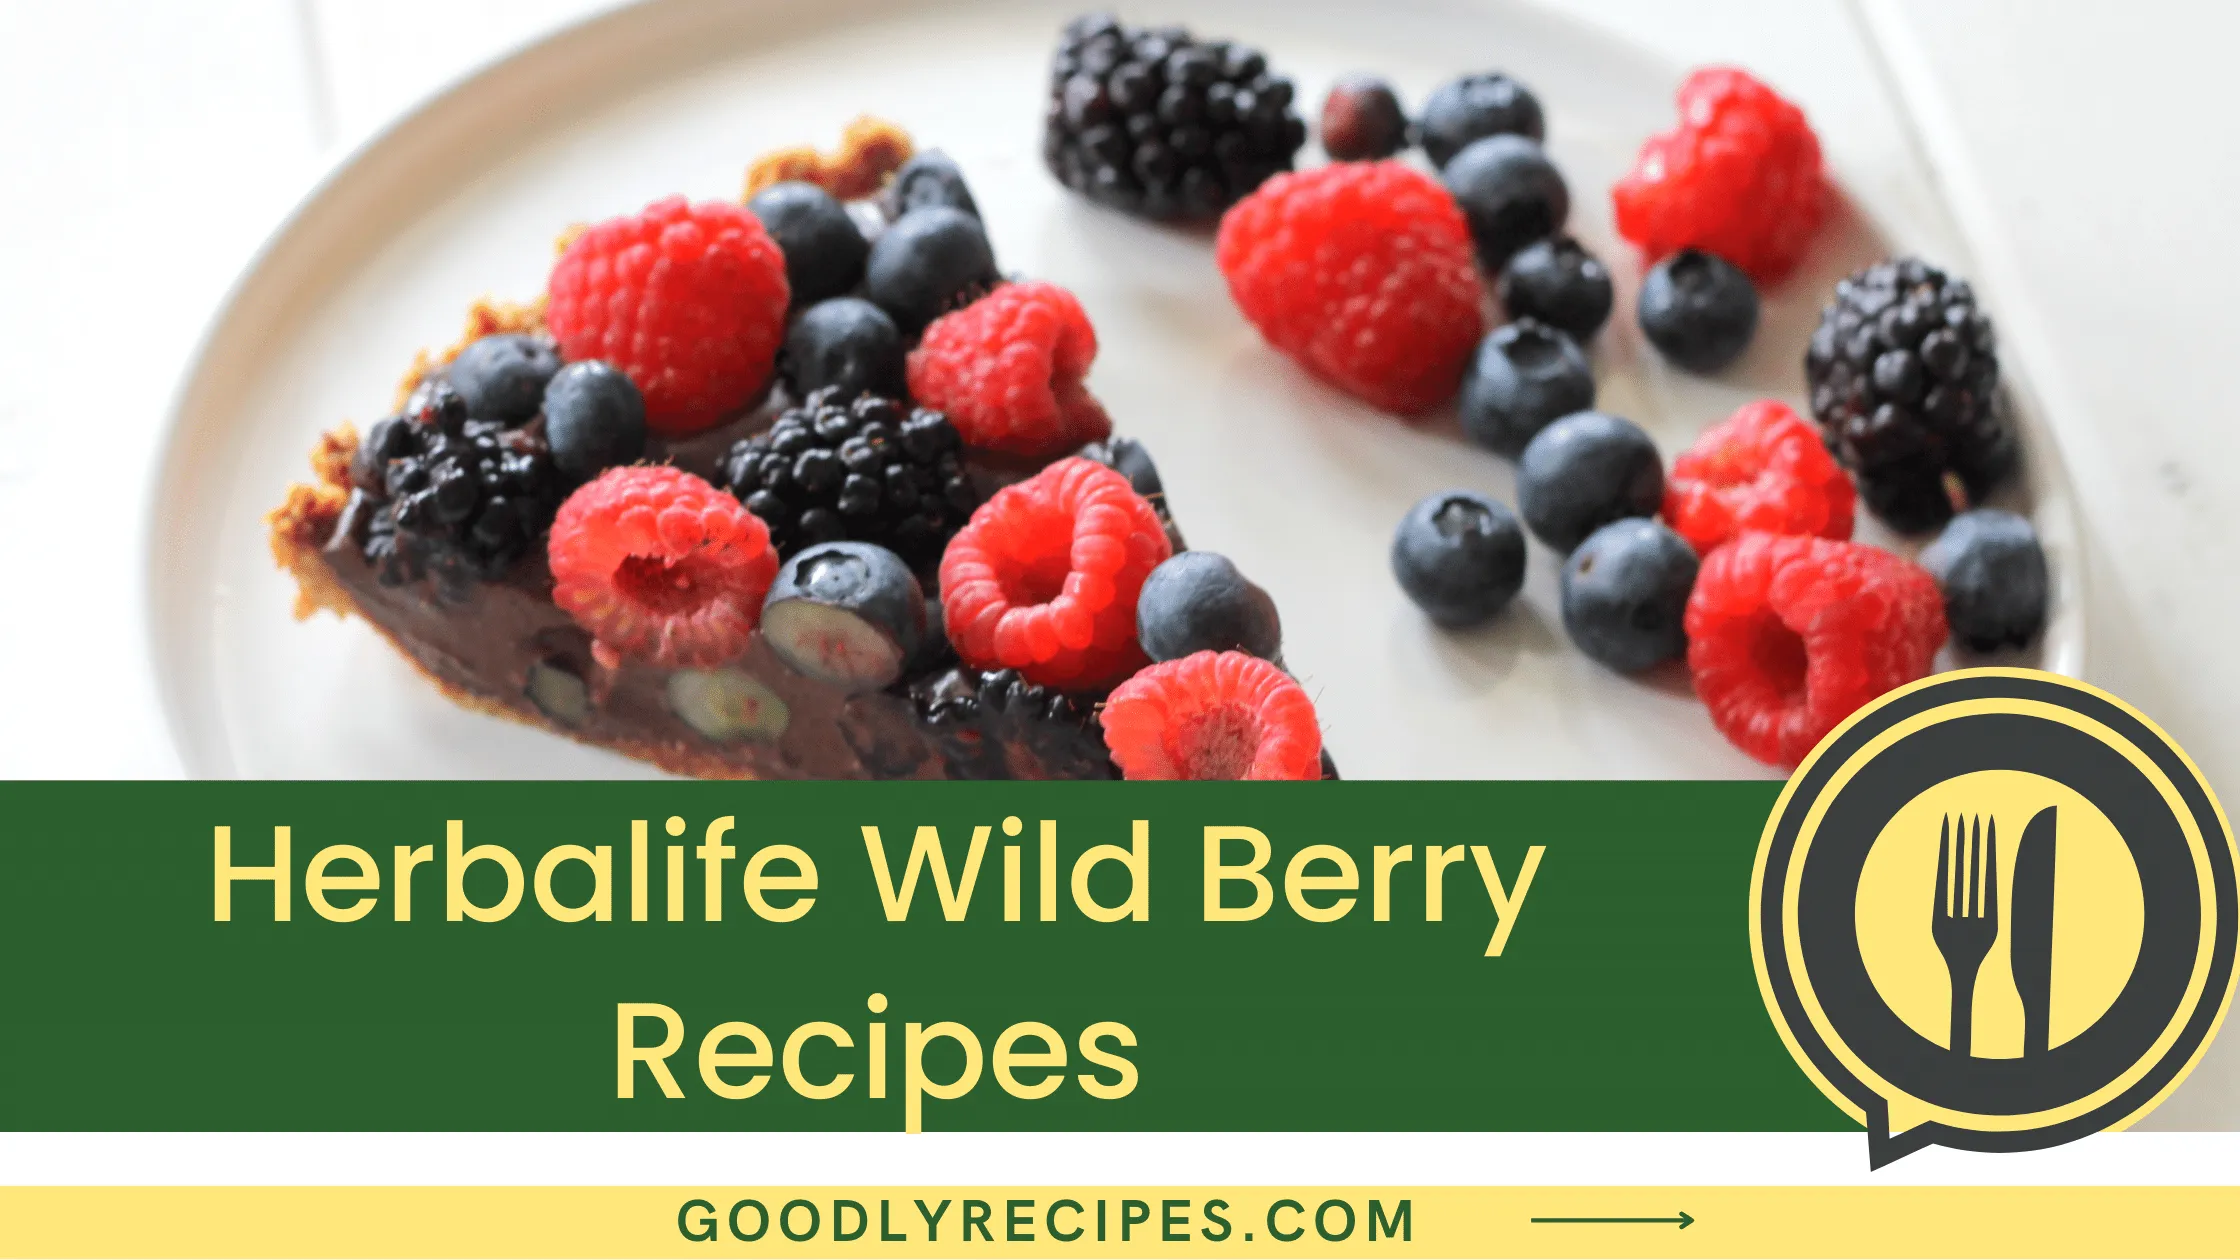 What are Herbalife Wild Berry Recipes?